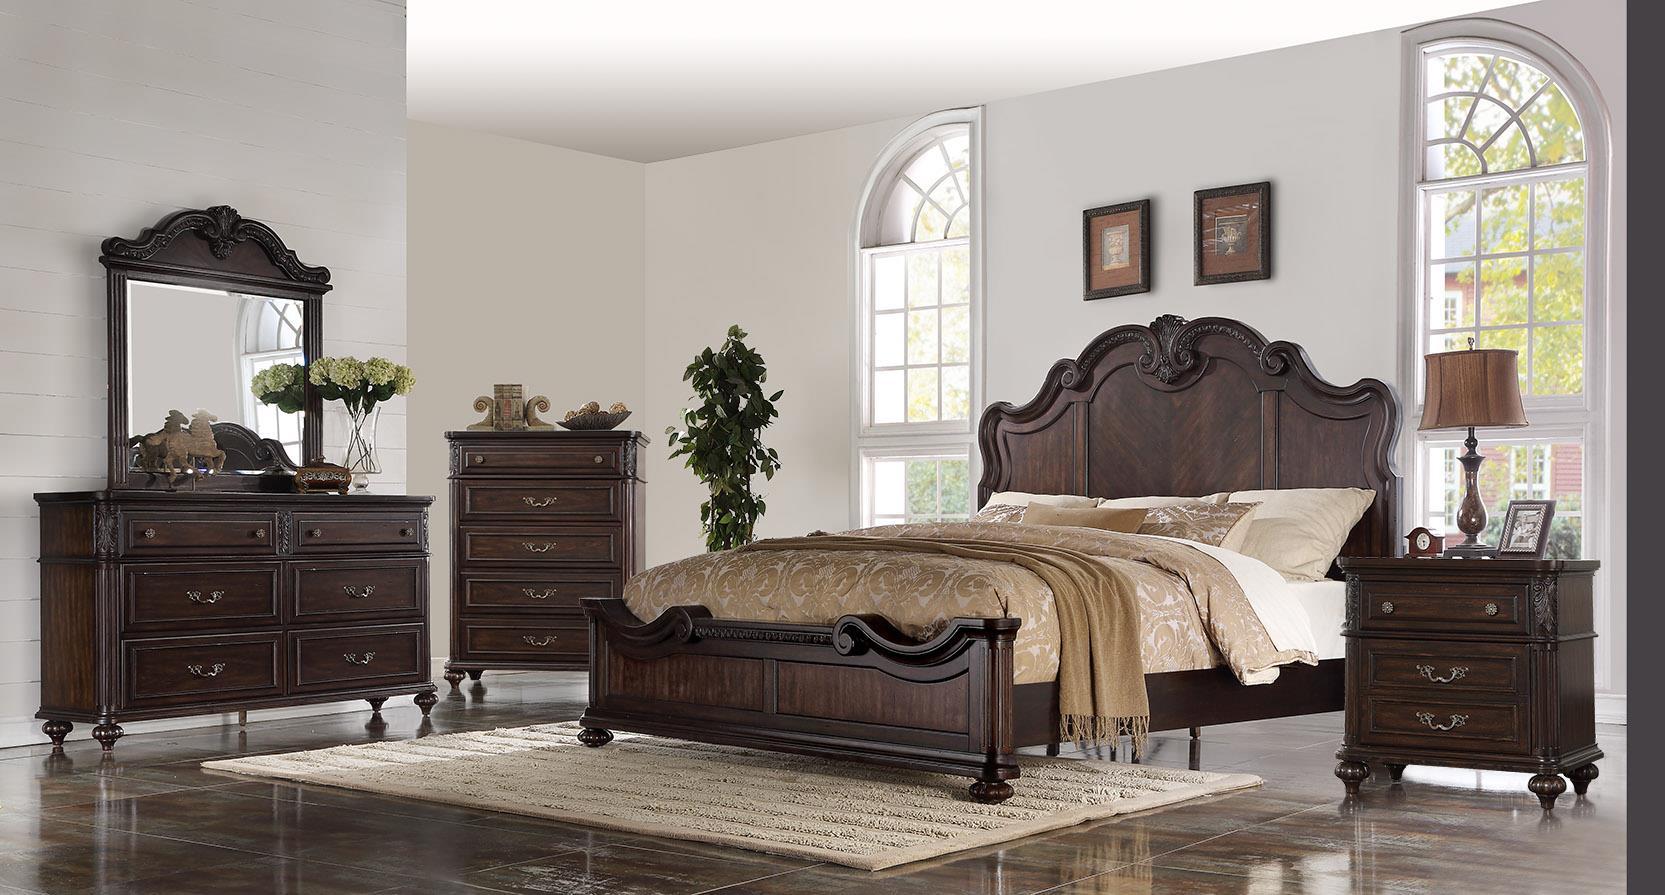 Classic, Transitional Panel Bed NOTTINGHAM 1610-105 1610-105 in Mahogany 